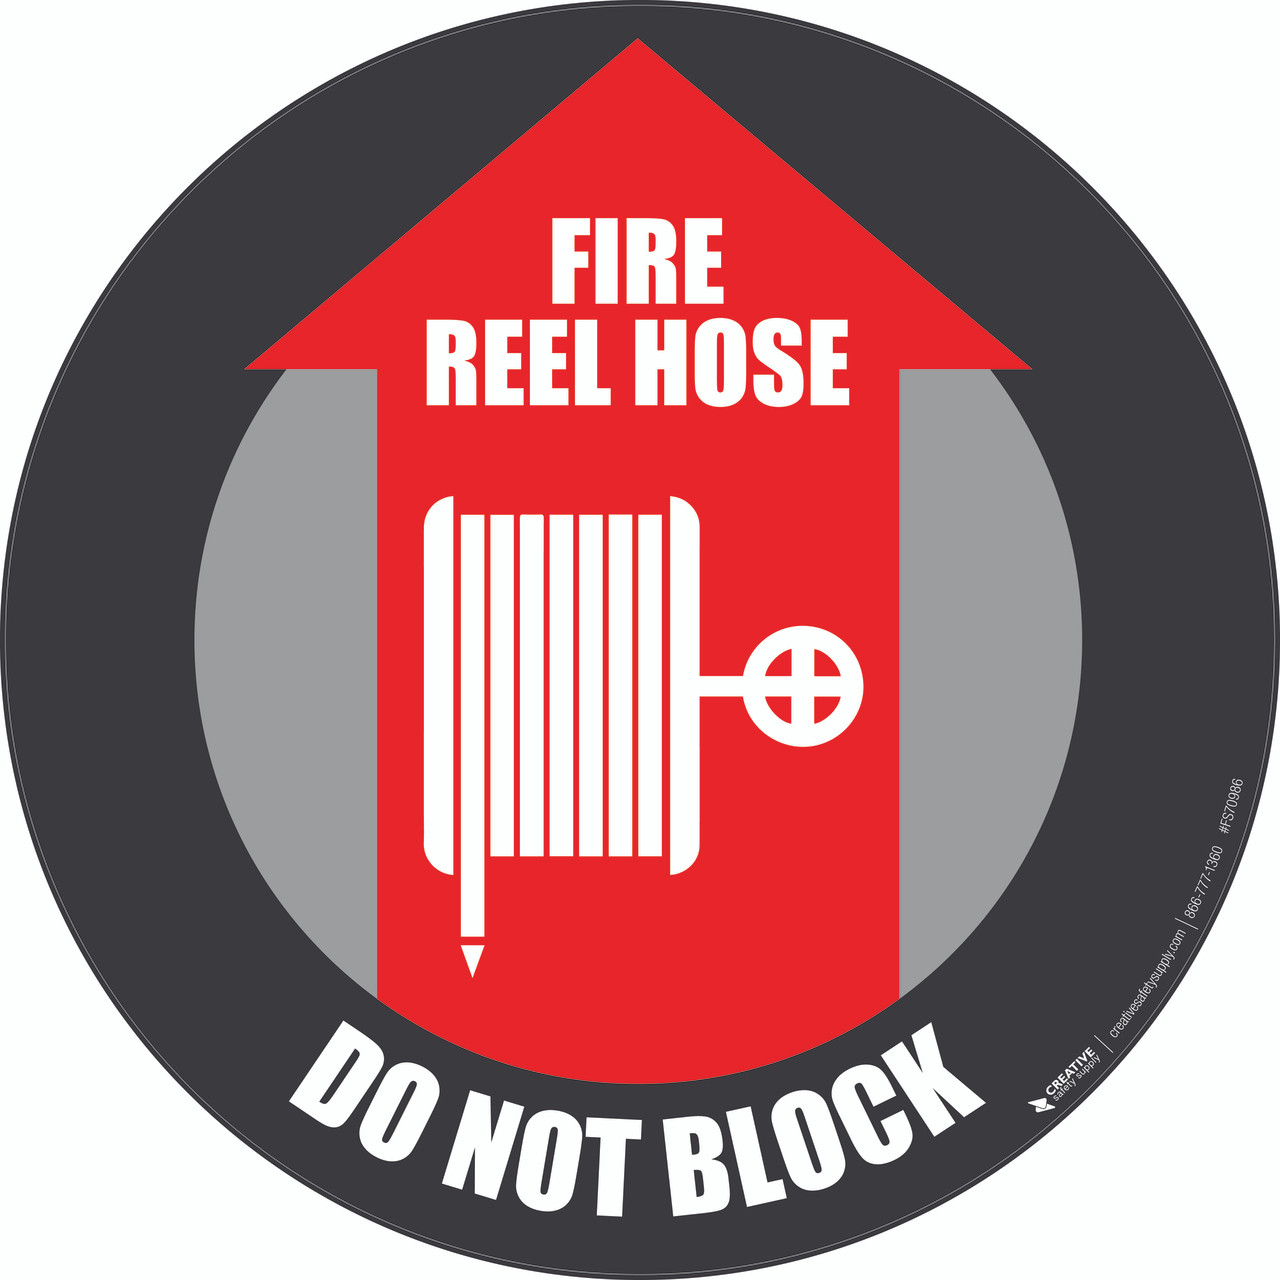 VARIOUS SIZES SIGN & STICKER OPTIONS FIRE HOSE REEL SIGN FIRE SAFETY SIGN 